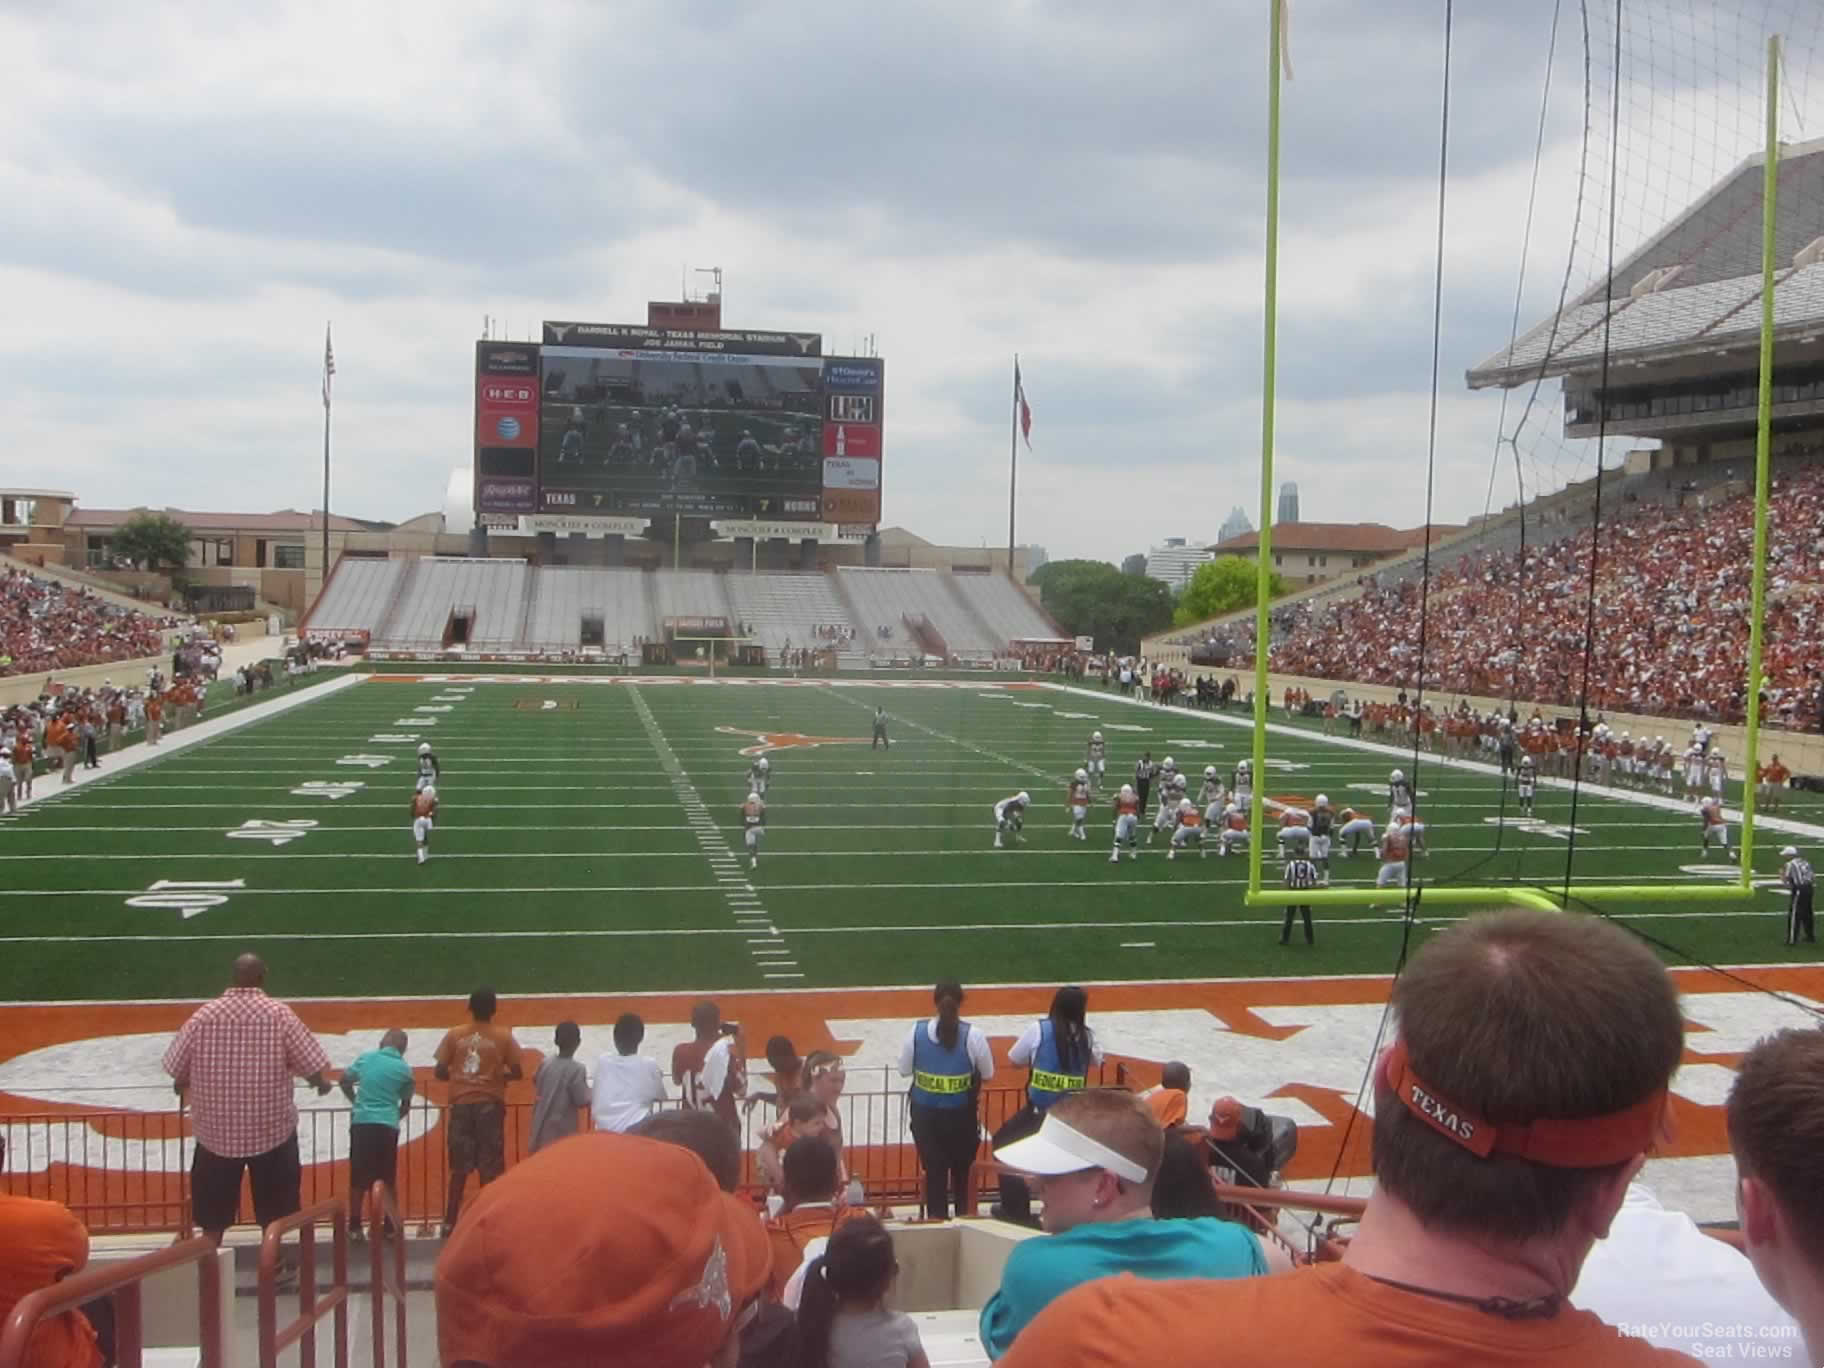 section 16, row 11 seat view  - dkr-texas memorial stadium